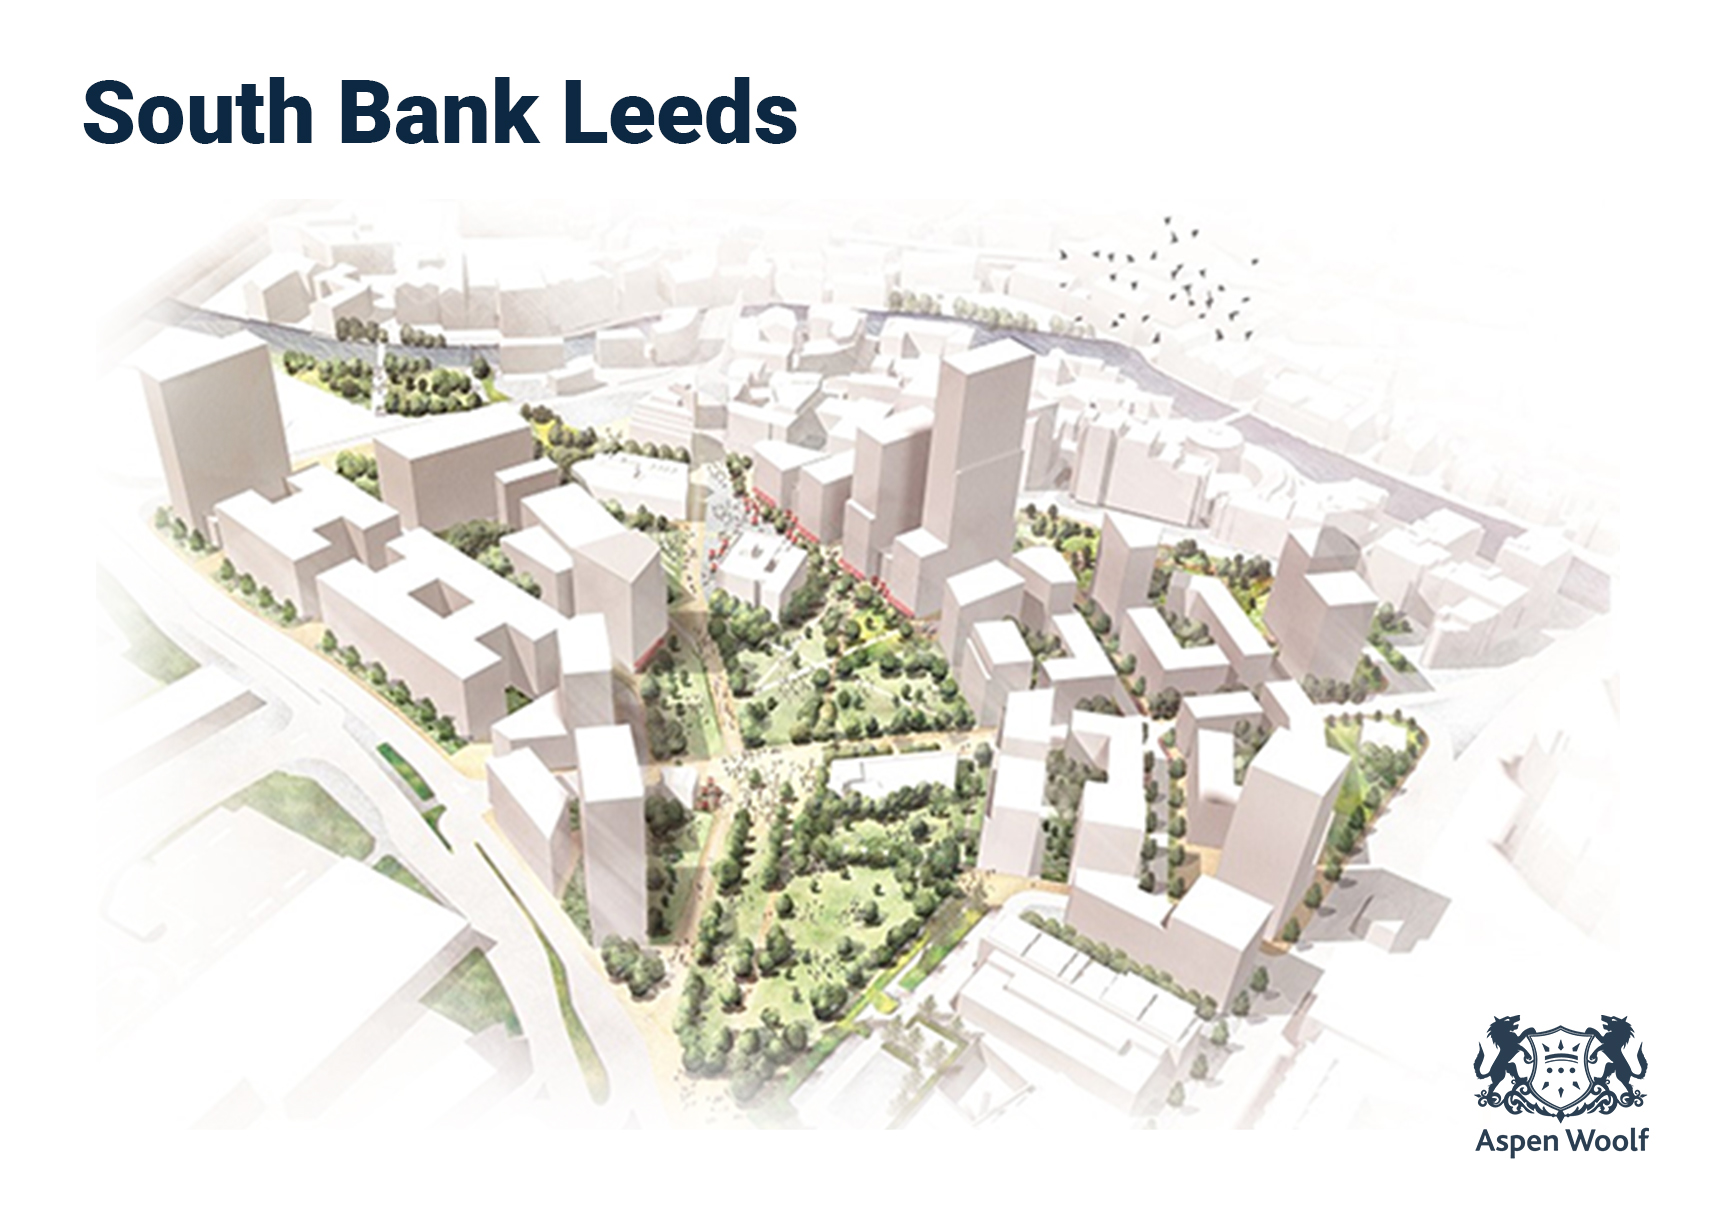 Property Investment in South bank Leeds – A Guide by Aspen Woolf